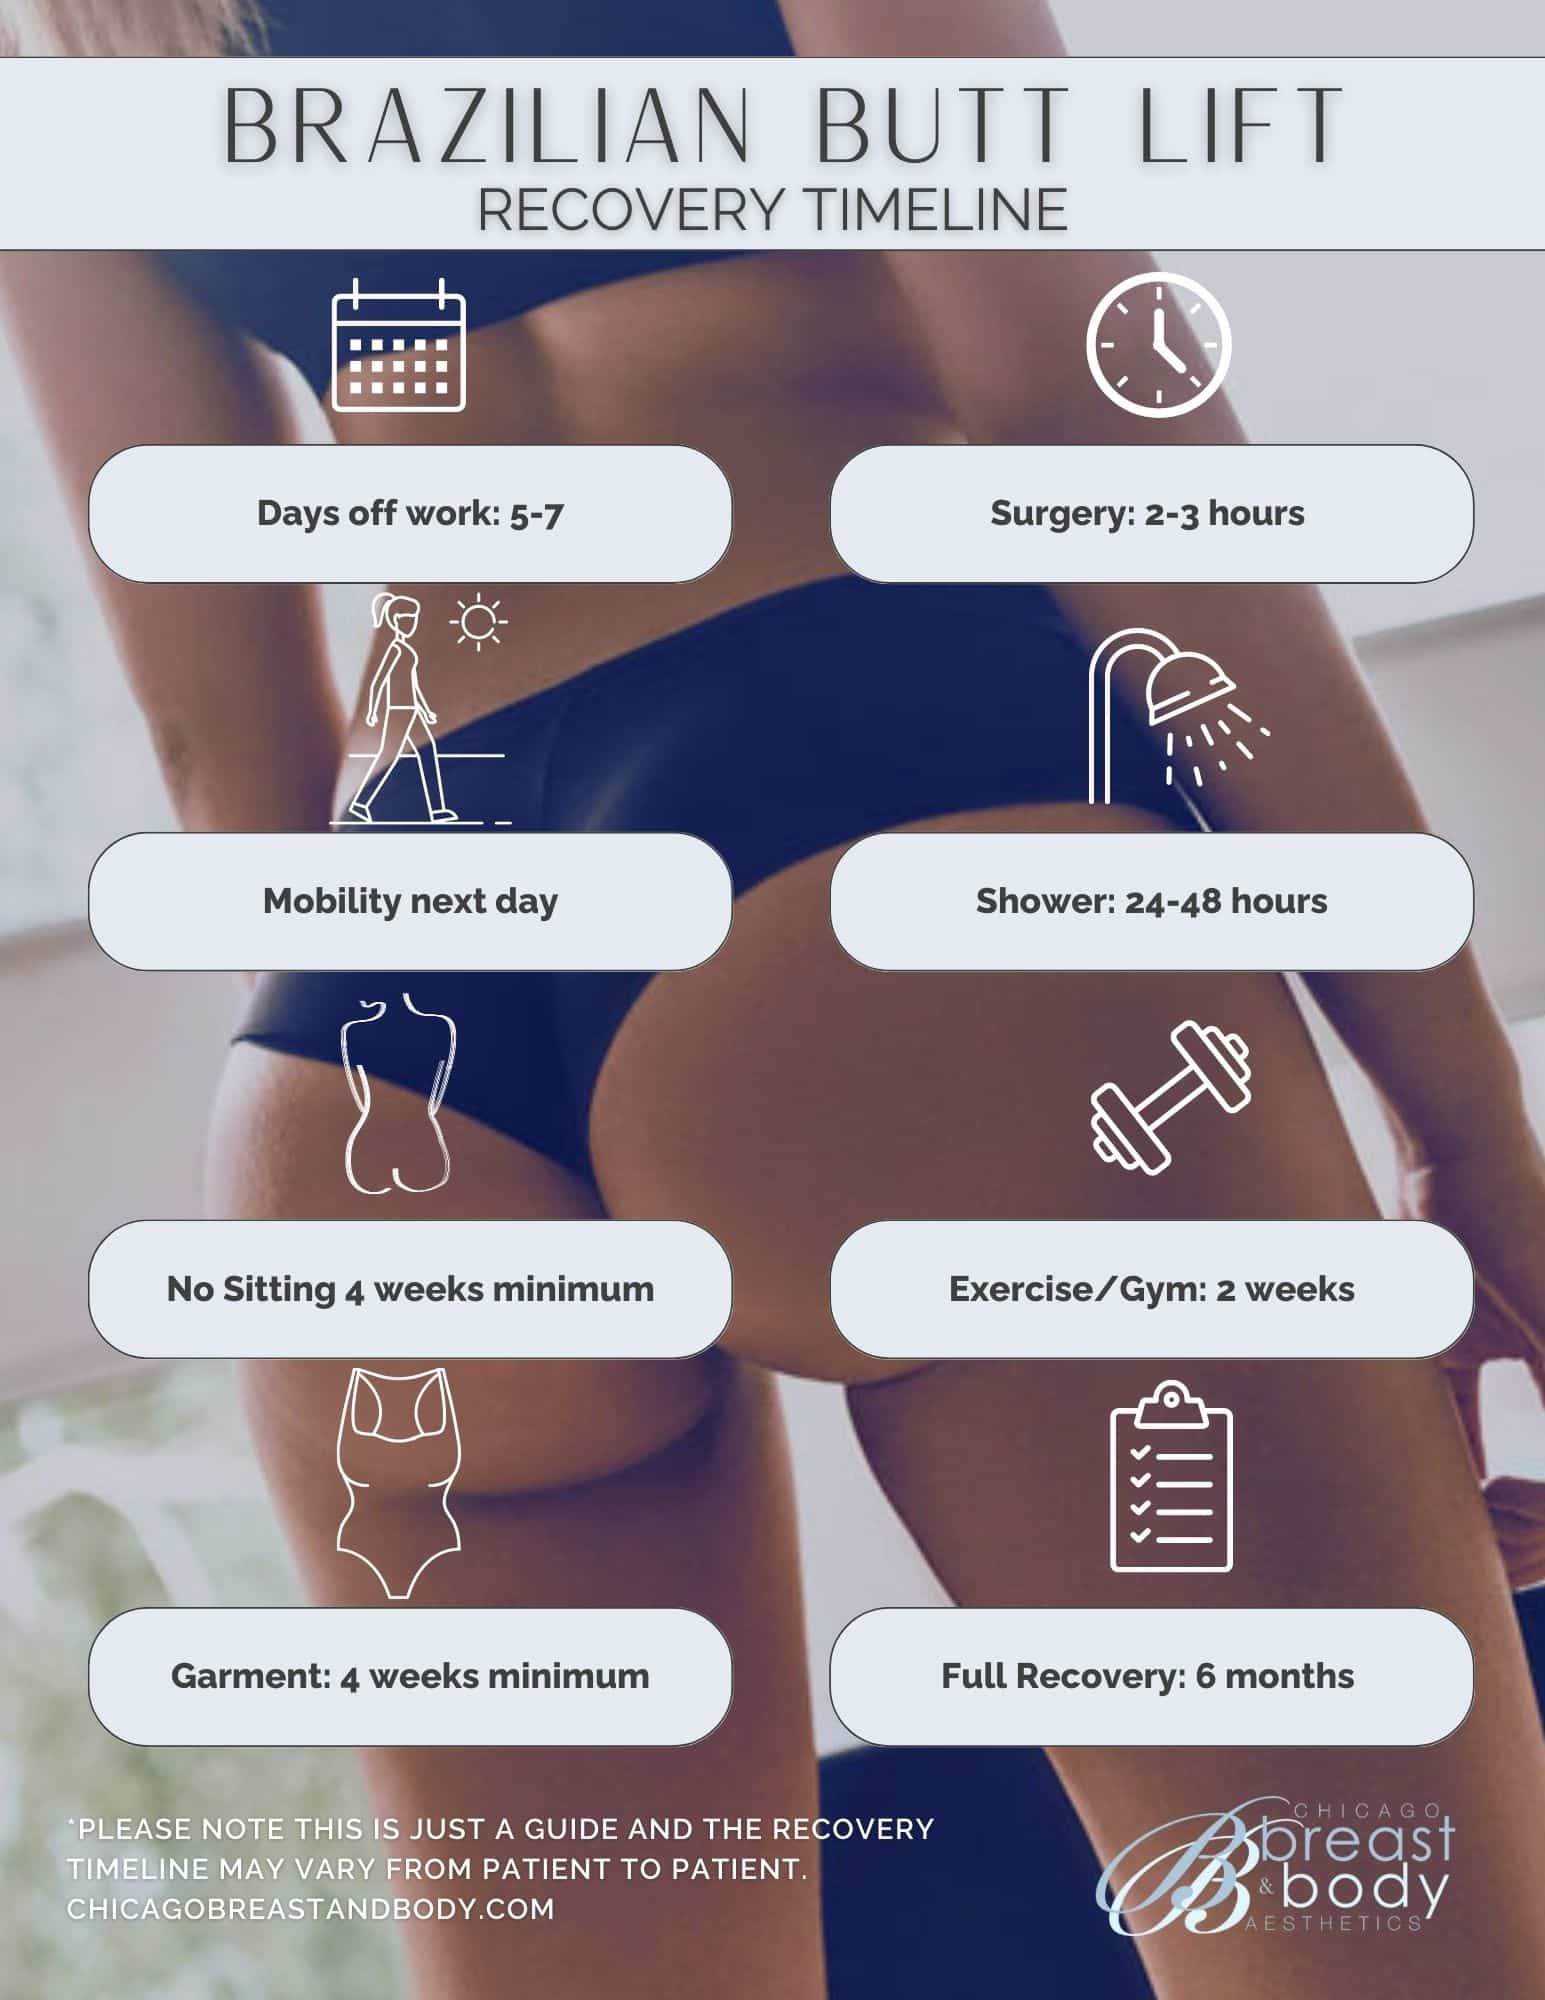 Recovery timeline for Skinny BBL or Skinny Brazilian Butt Lift at Chicago Breast and Body Aesthetics